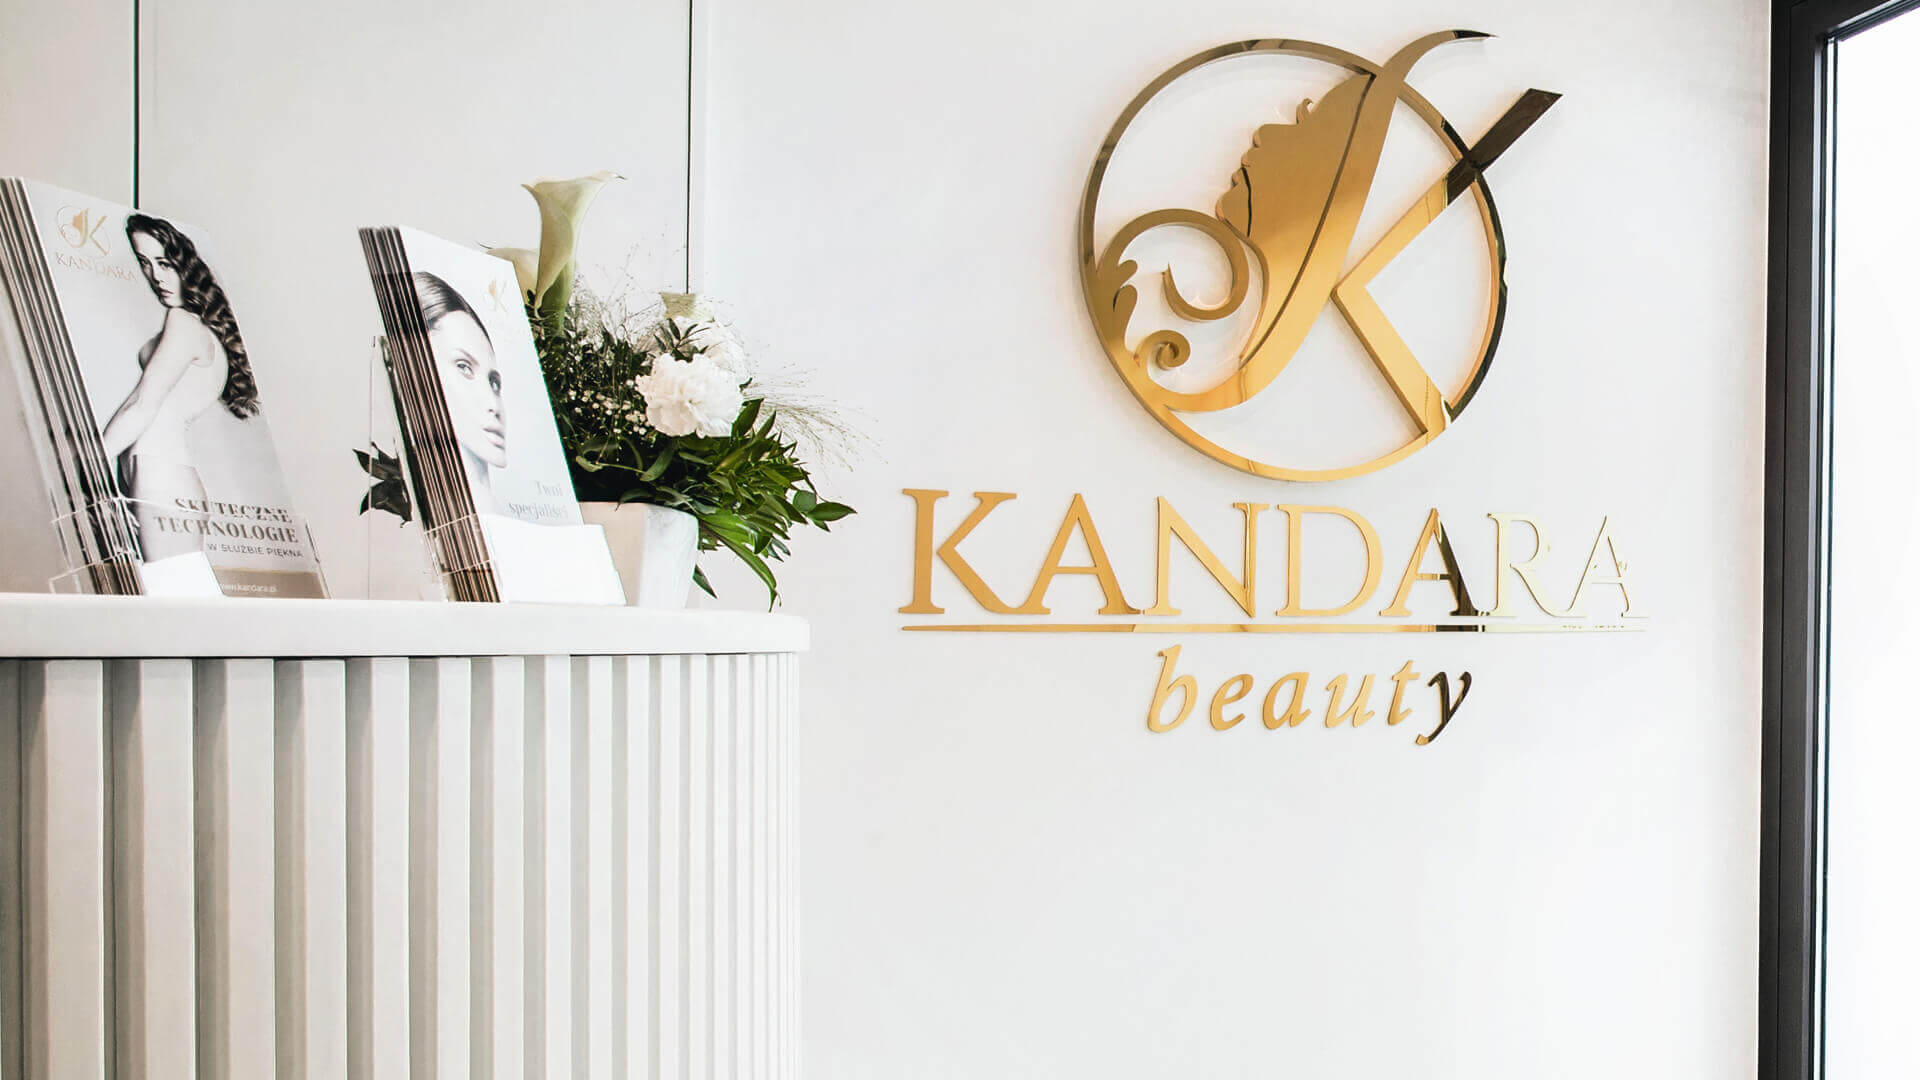 Kandara beauty - Logo with name made of gold stainless steel.